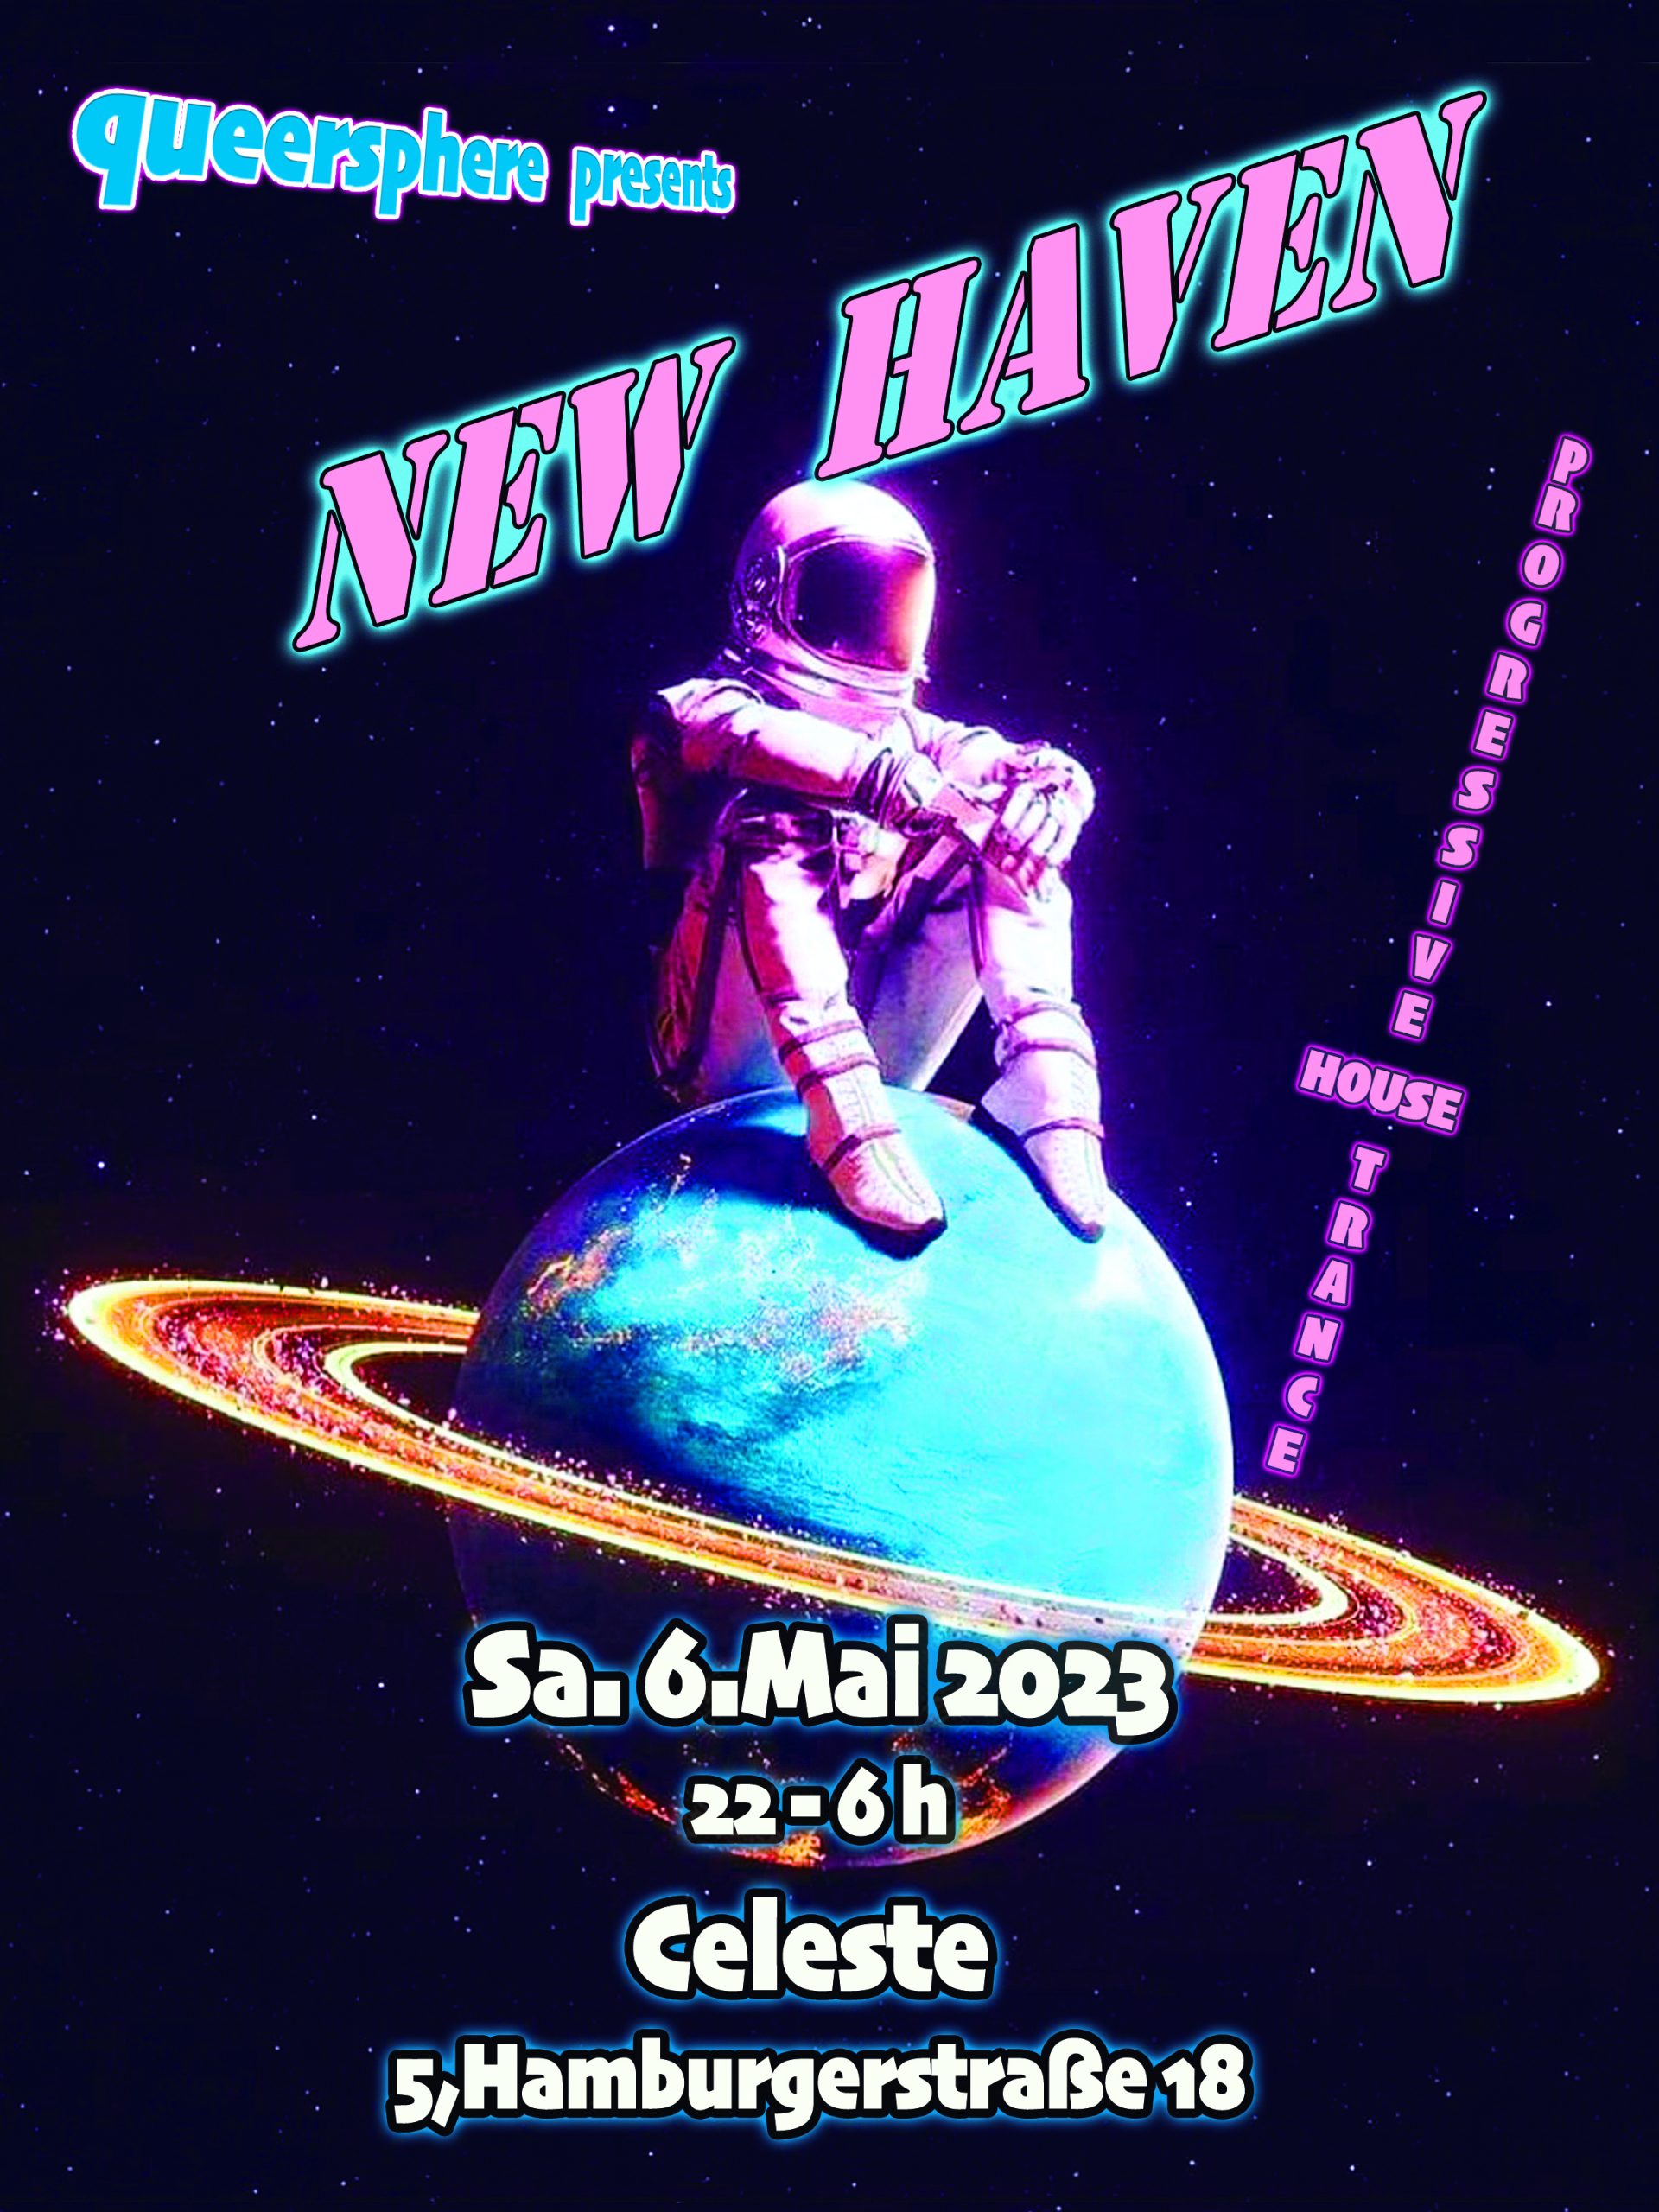 NEW HAVEN am 6. May 2023 @ Celeste.